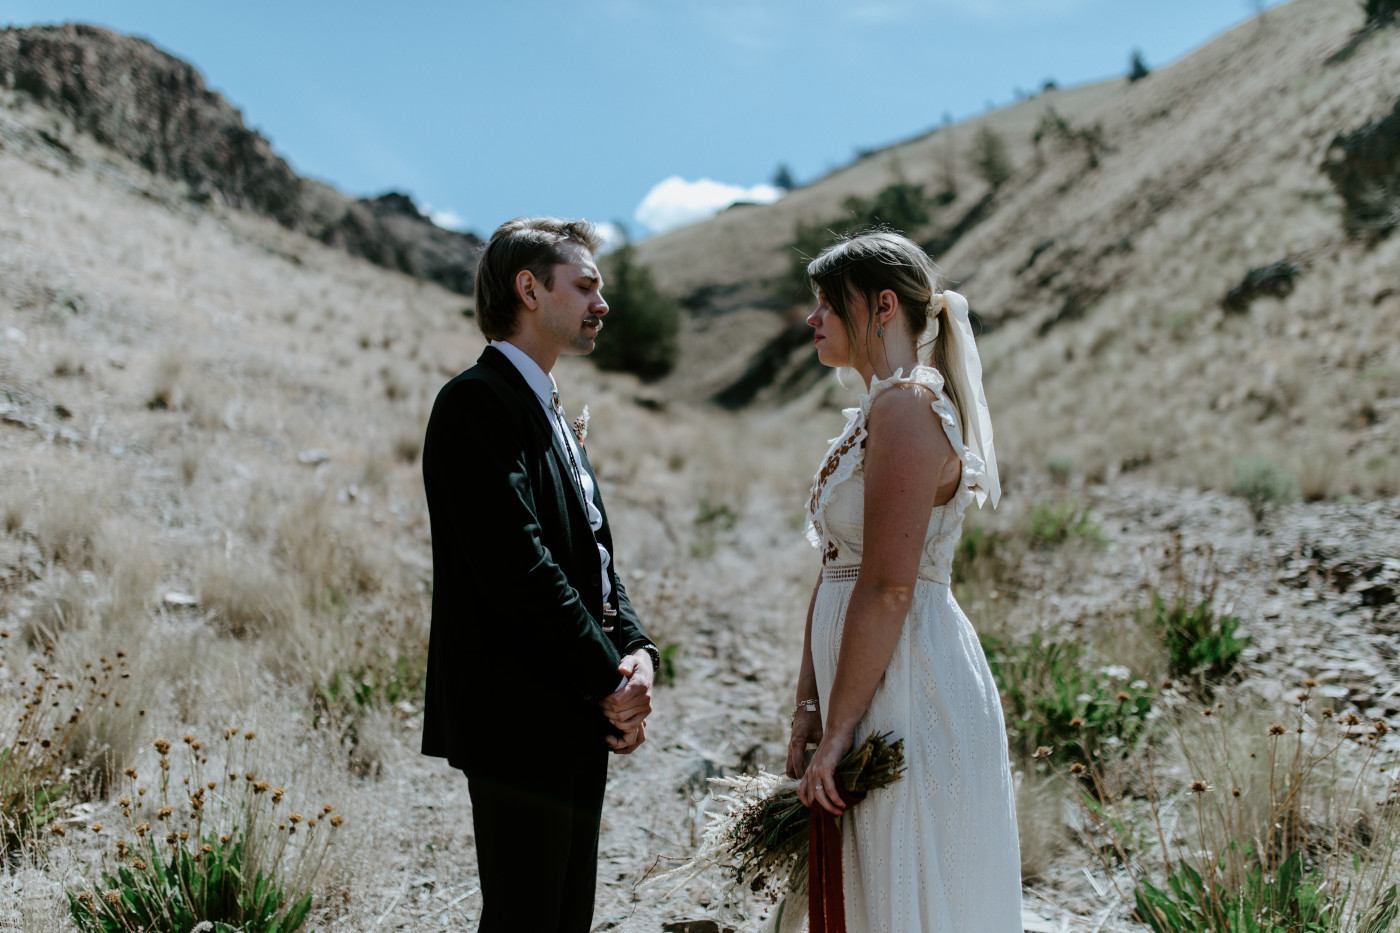 Greyson and Emily reciting vows. Elopement photography in the Central Oregon desert by Sienna Plus Josh.